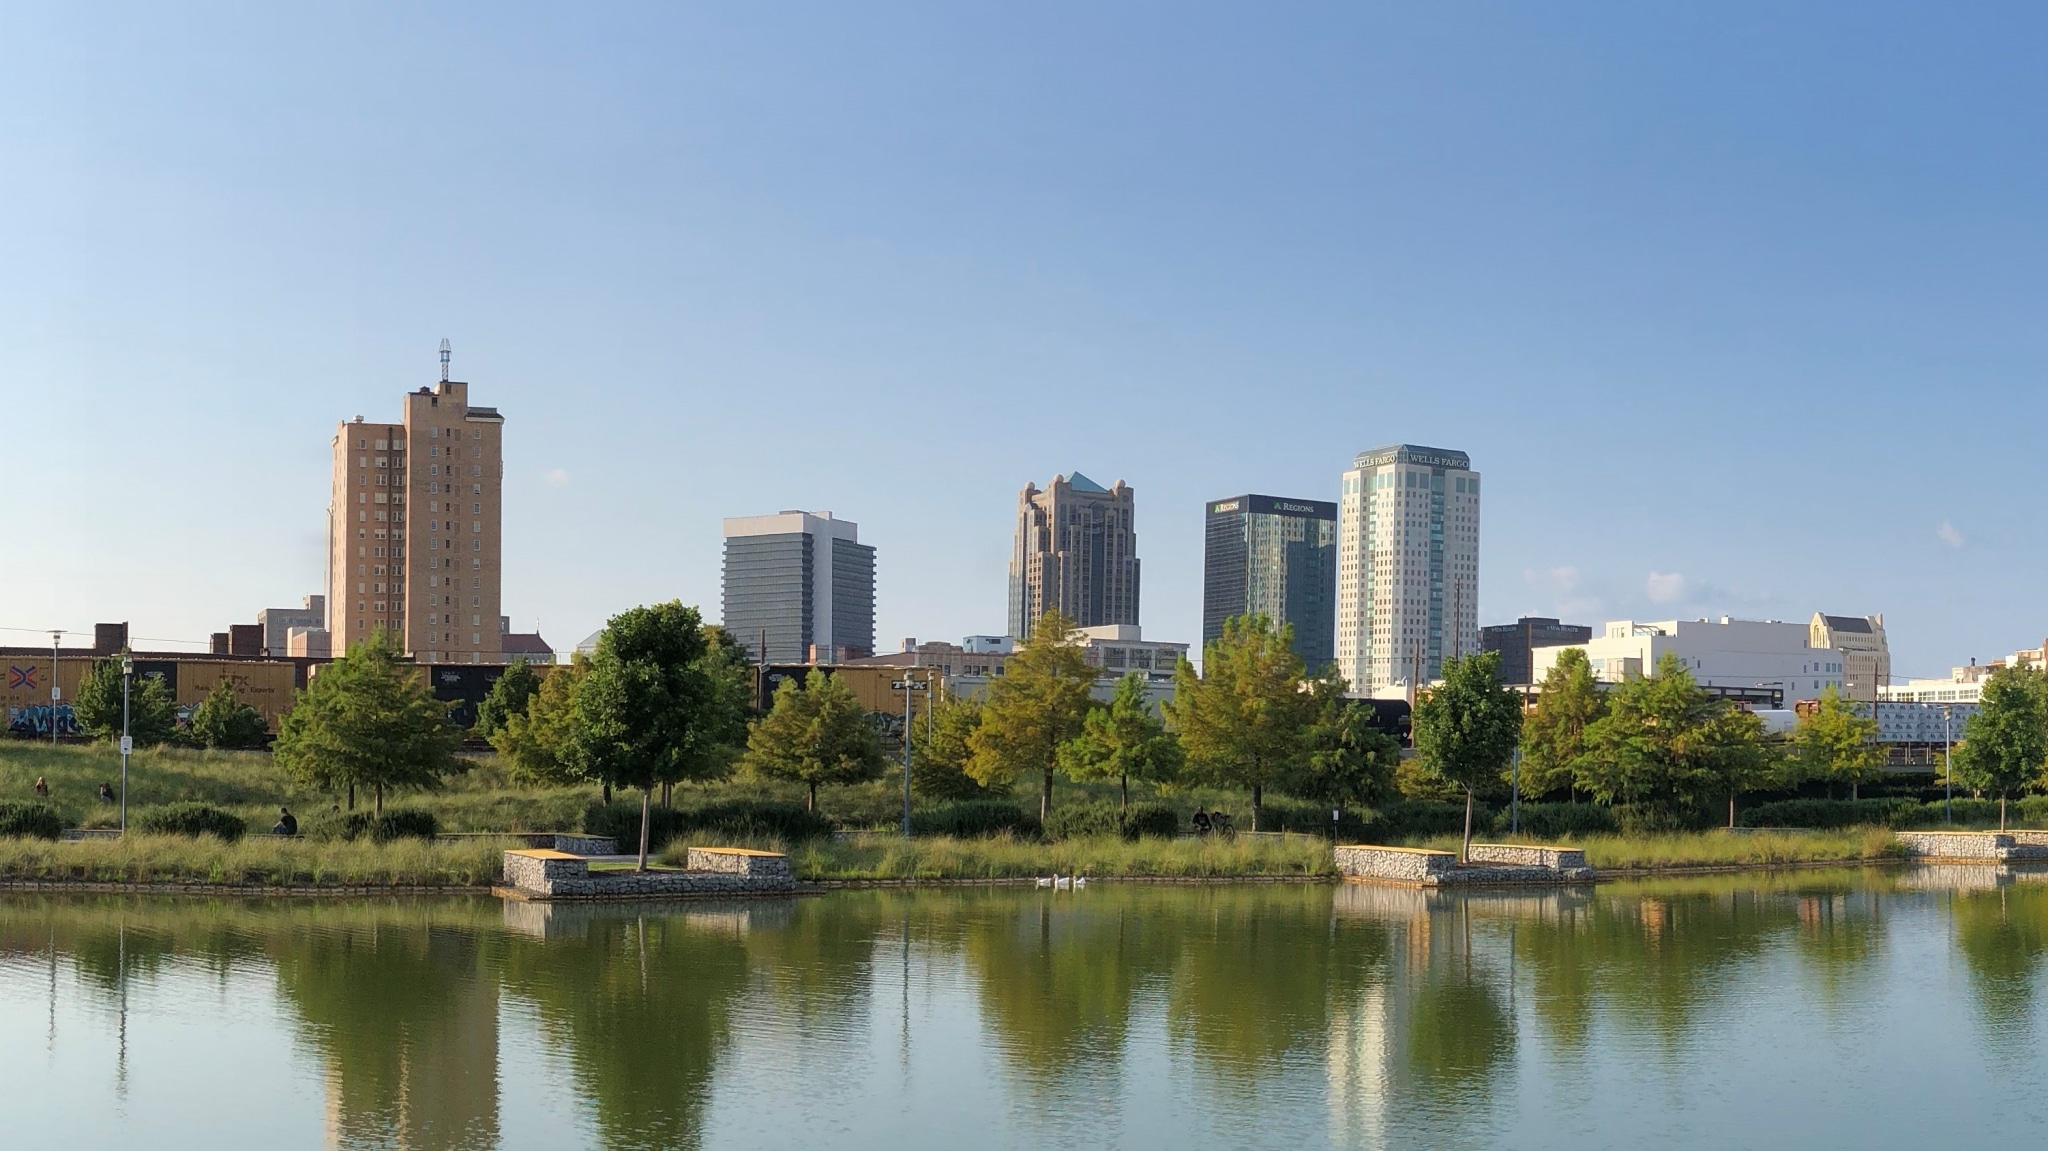 REV Birmingham has released state of downtown report and the future looks bright